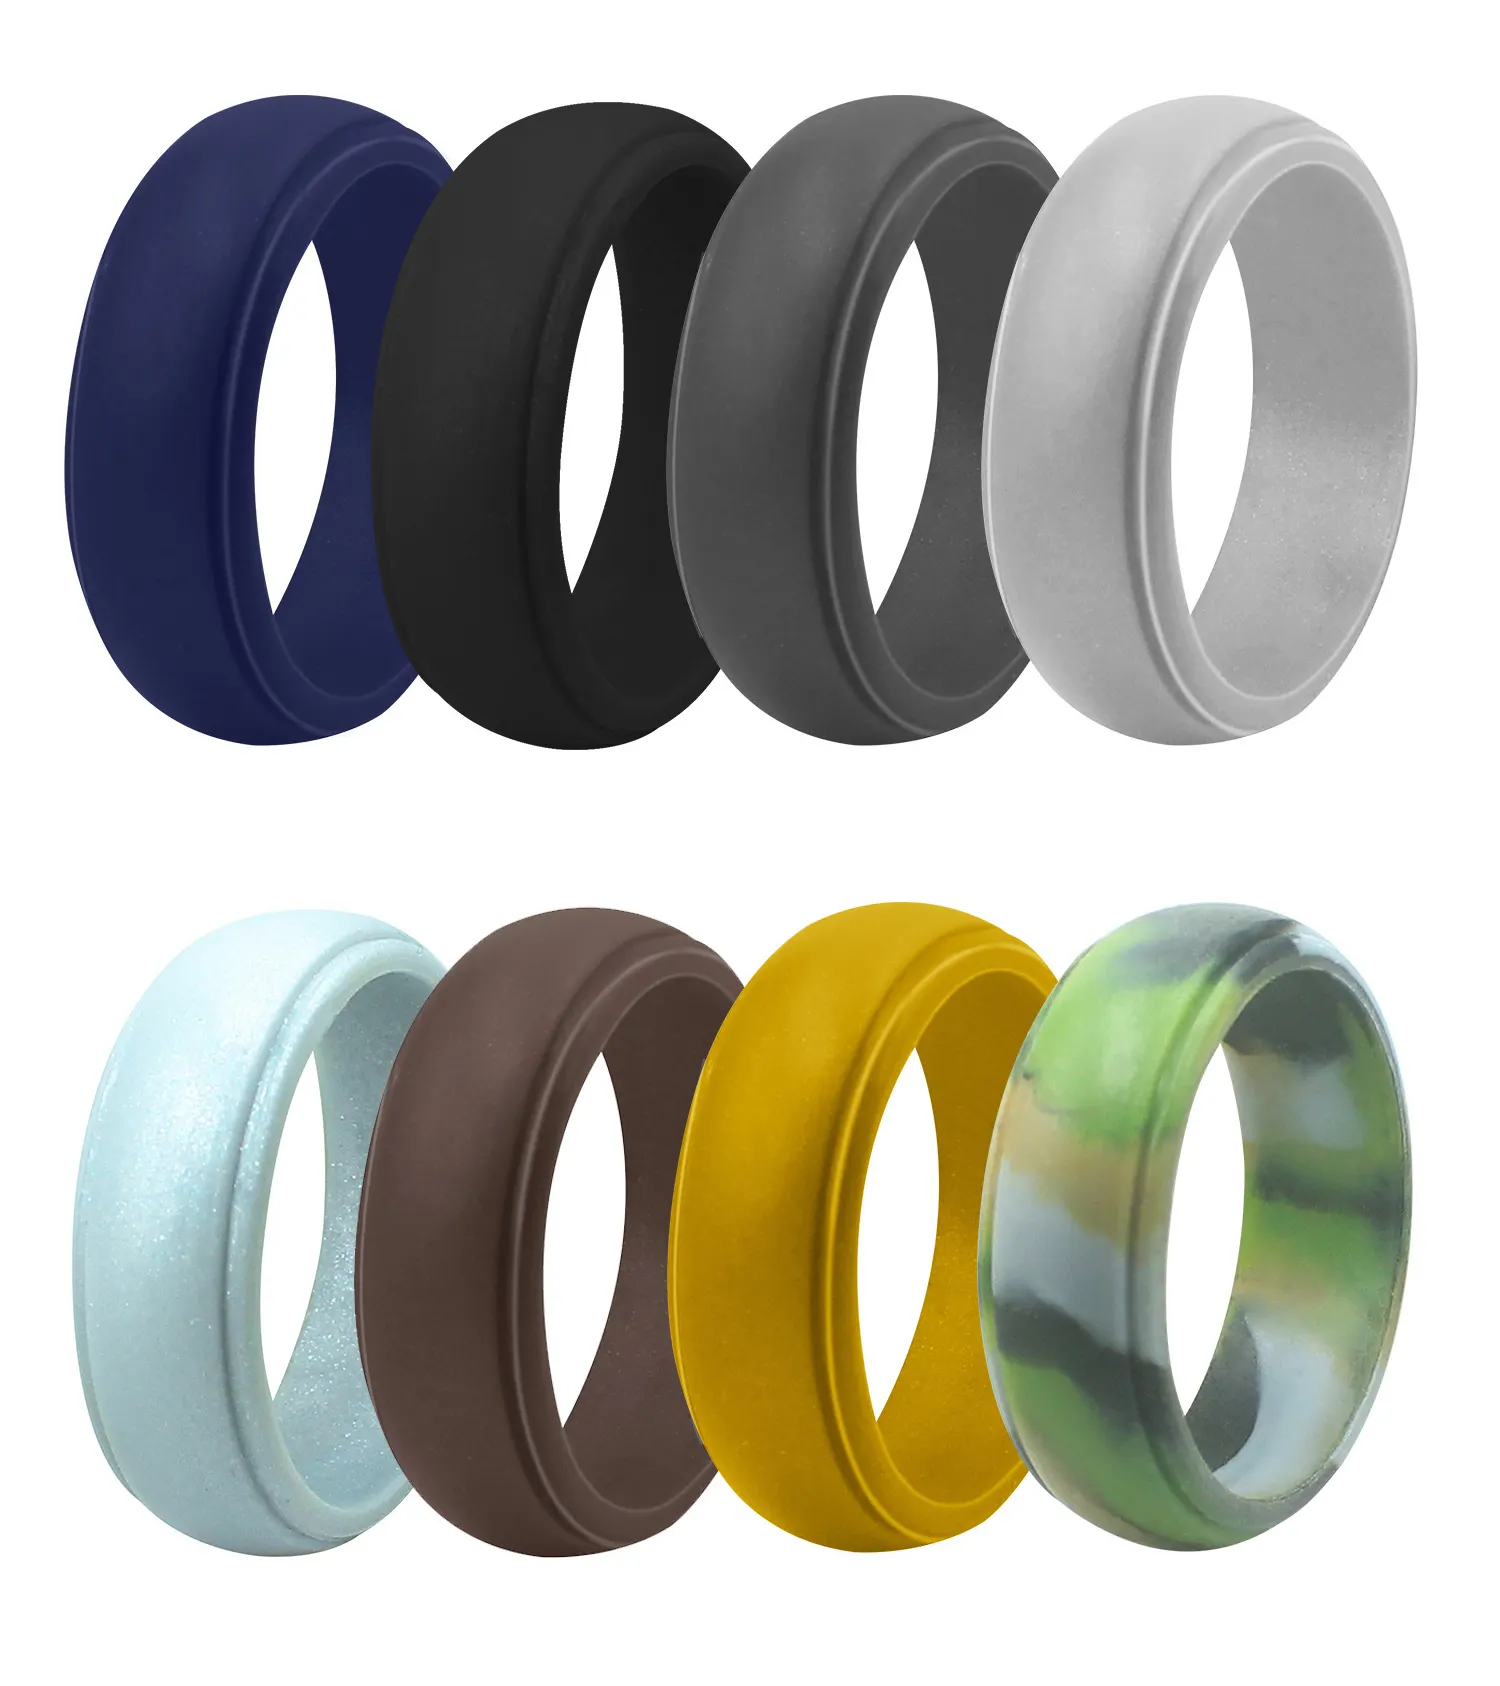 Men's Silicone Ring, Step Edge Rubber Wedding Band, 8mm Wide, 2.5mm Thick